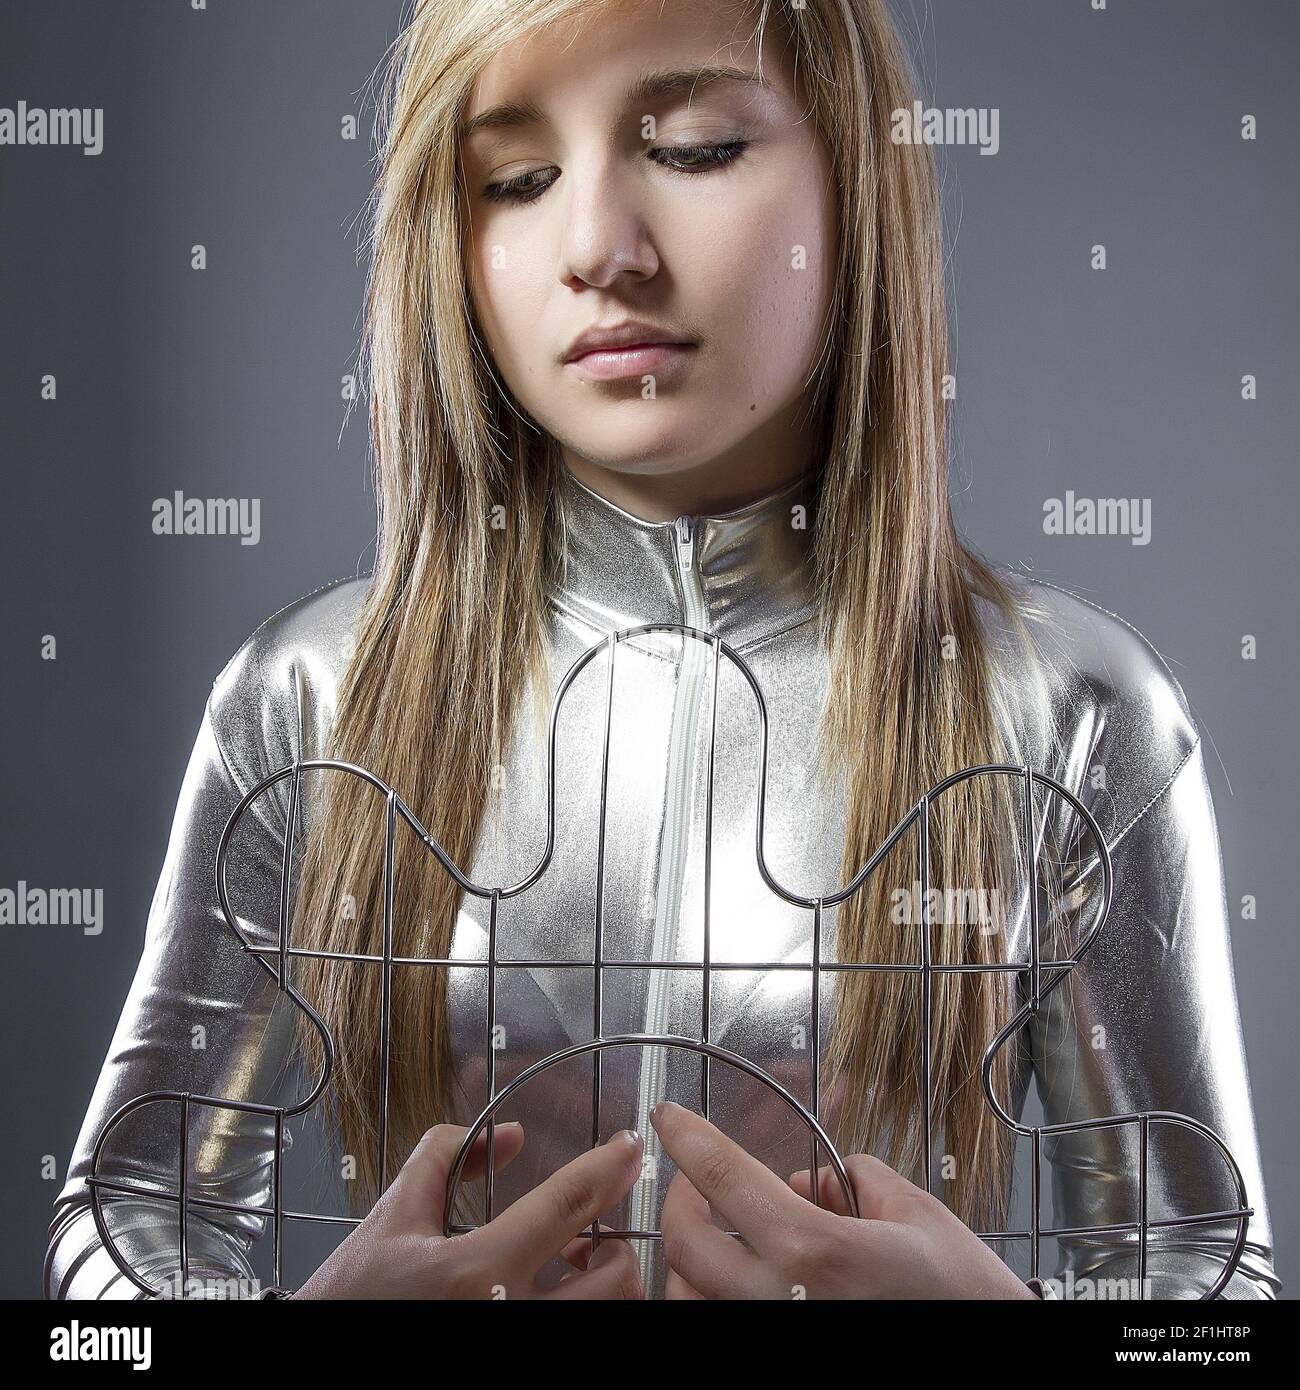 Blond woman of the future with silver-plated suit, concept new technologies and adaptation of the human being Stock Photo